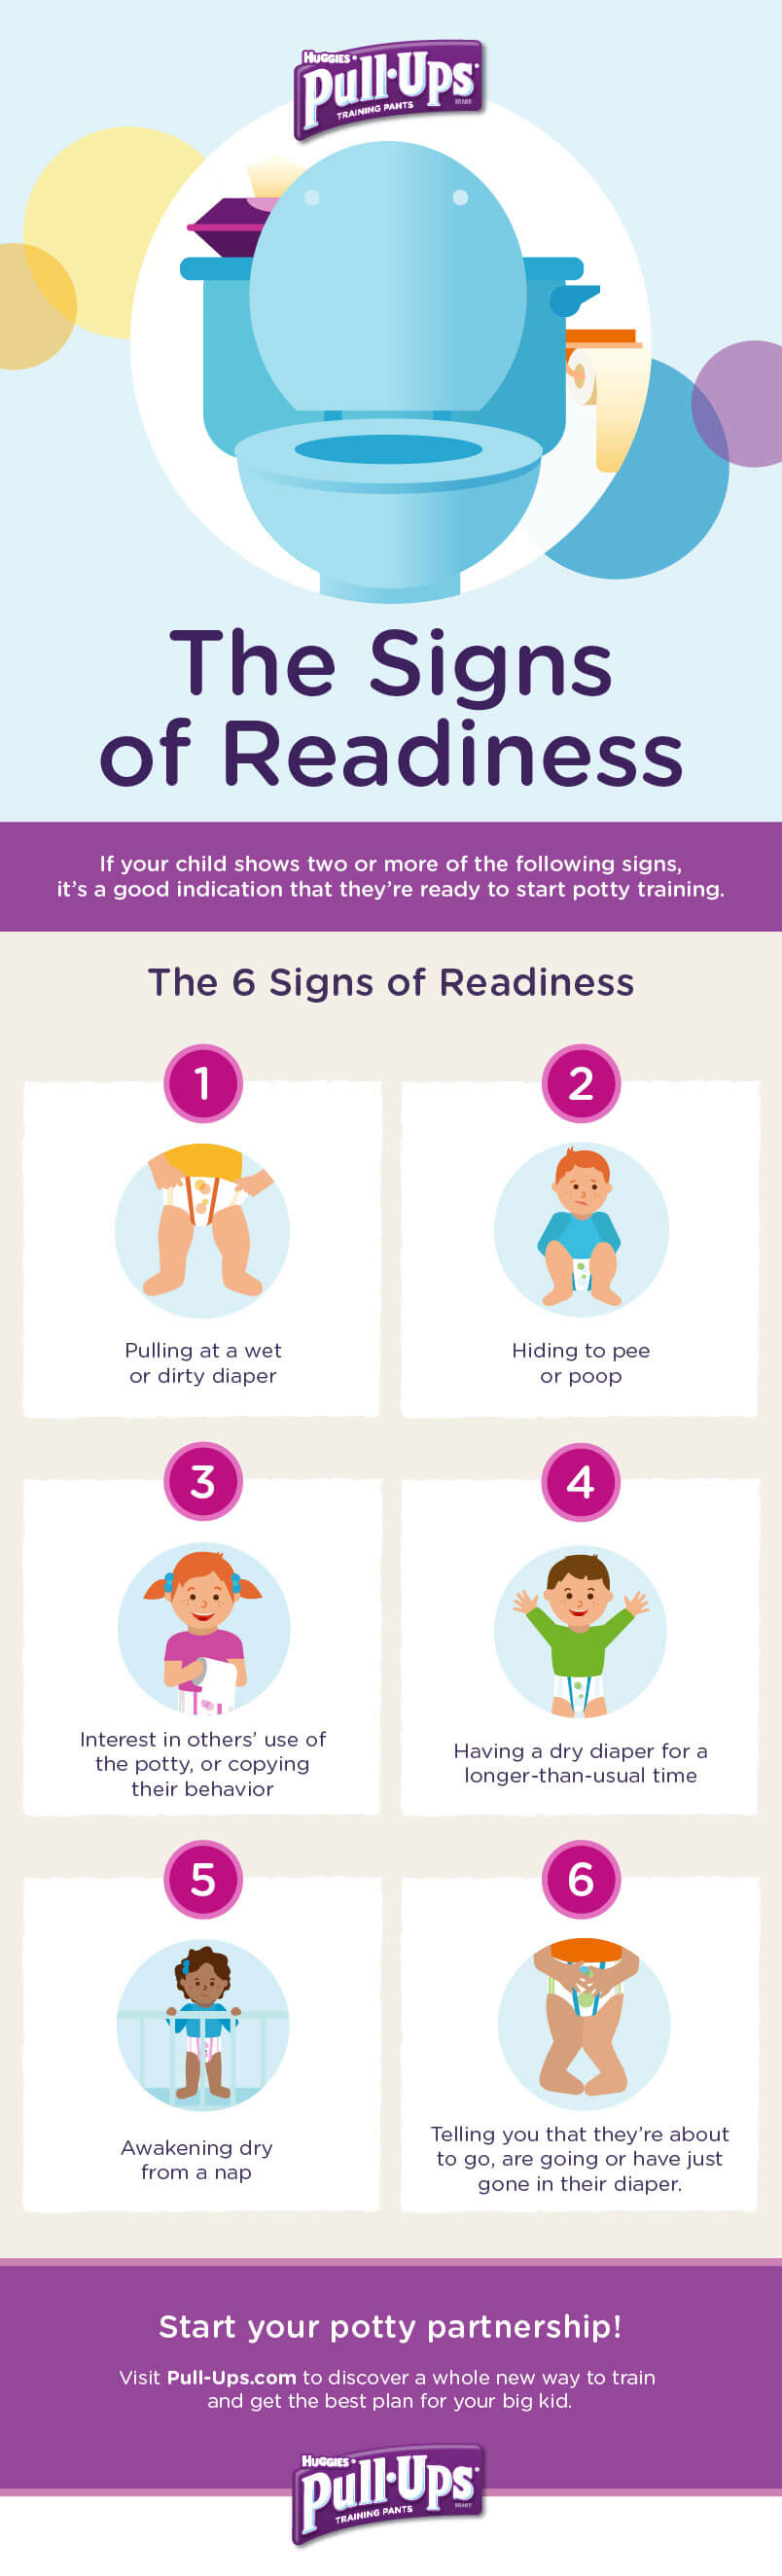 https://www.pull-ups.com/-/media/feature/article/articledetail/tips-and-advice/when-to-start/6-signs-your-child-is-ready.jpg?h=2649&w=804&hash=1F8287F53AF1D824849D8F9CA8F82C2B